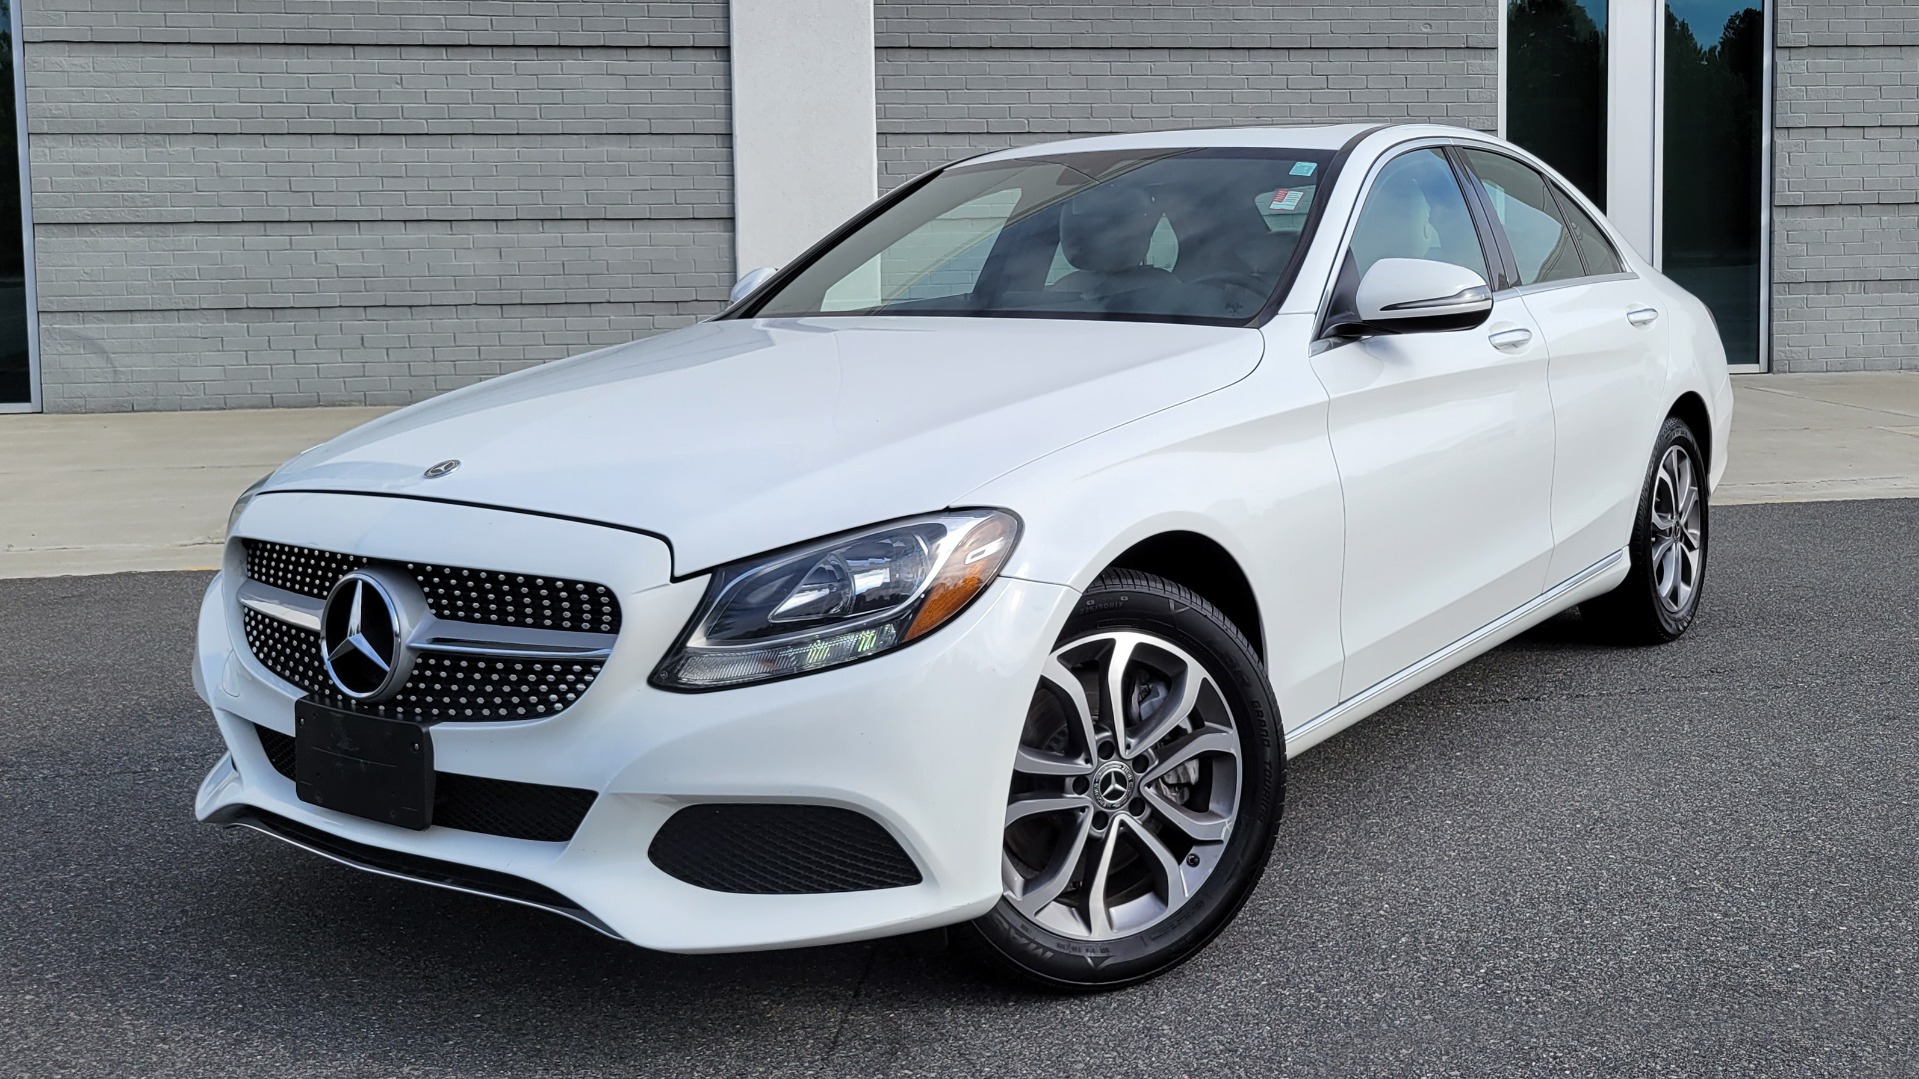 Used 2018 Mercedes-Benz C-CLASS C 300 PREMIUM / SUNROOF / SMARTPHONE / COMFORT SUSP / CAMERA for sale $31,395 at Formula Imports in Charlotte NC 28227 1